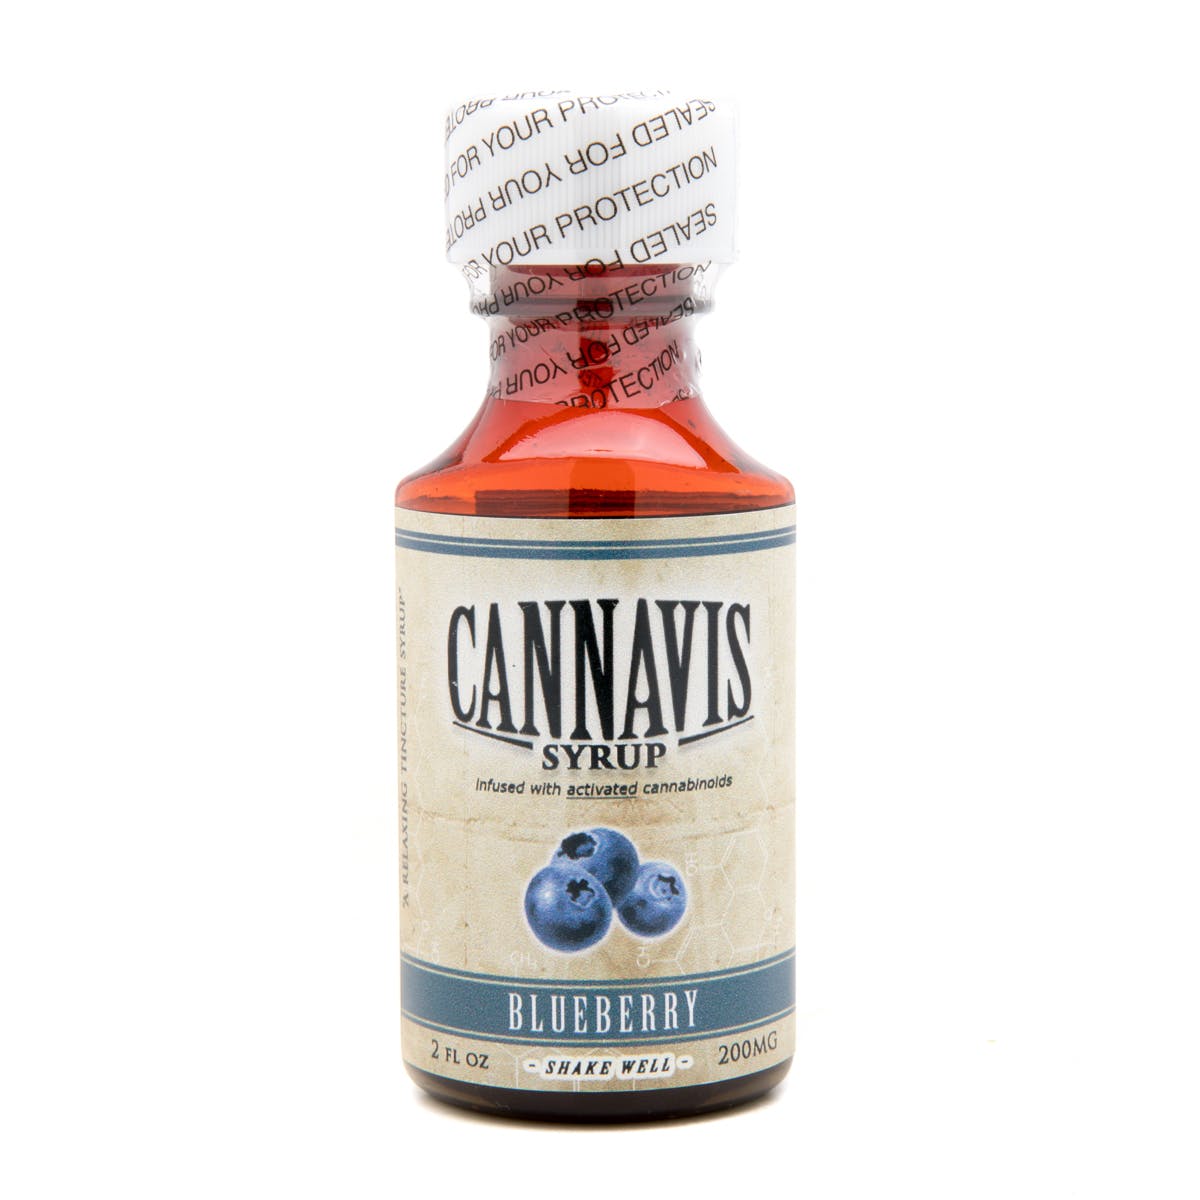 marijuana-dispensaries-church-of-holy-fire-in-city-of-industry-cannavis-syrup-2c-blueberry-200mg